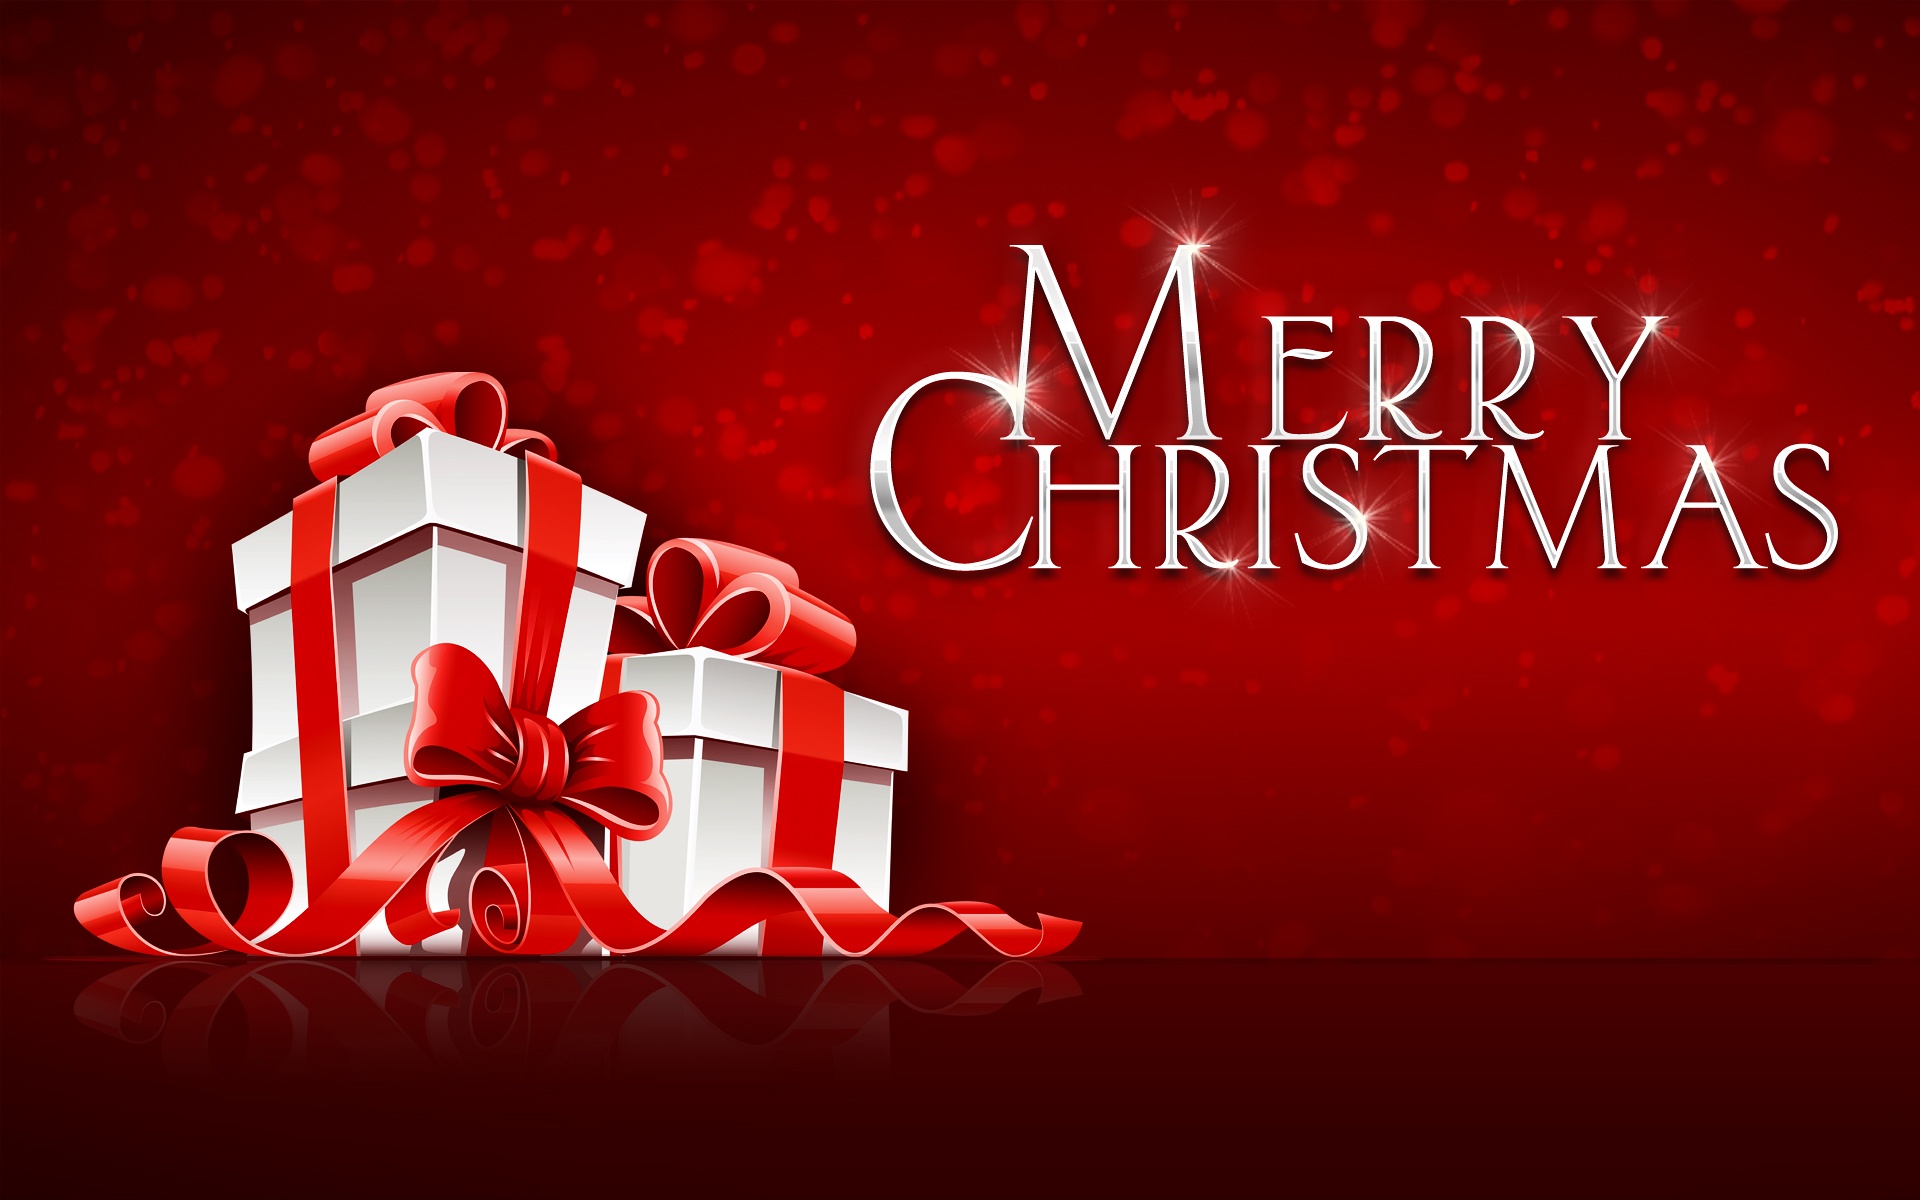 Merry Christmas Hd Wallpapers Free Download - Riset